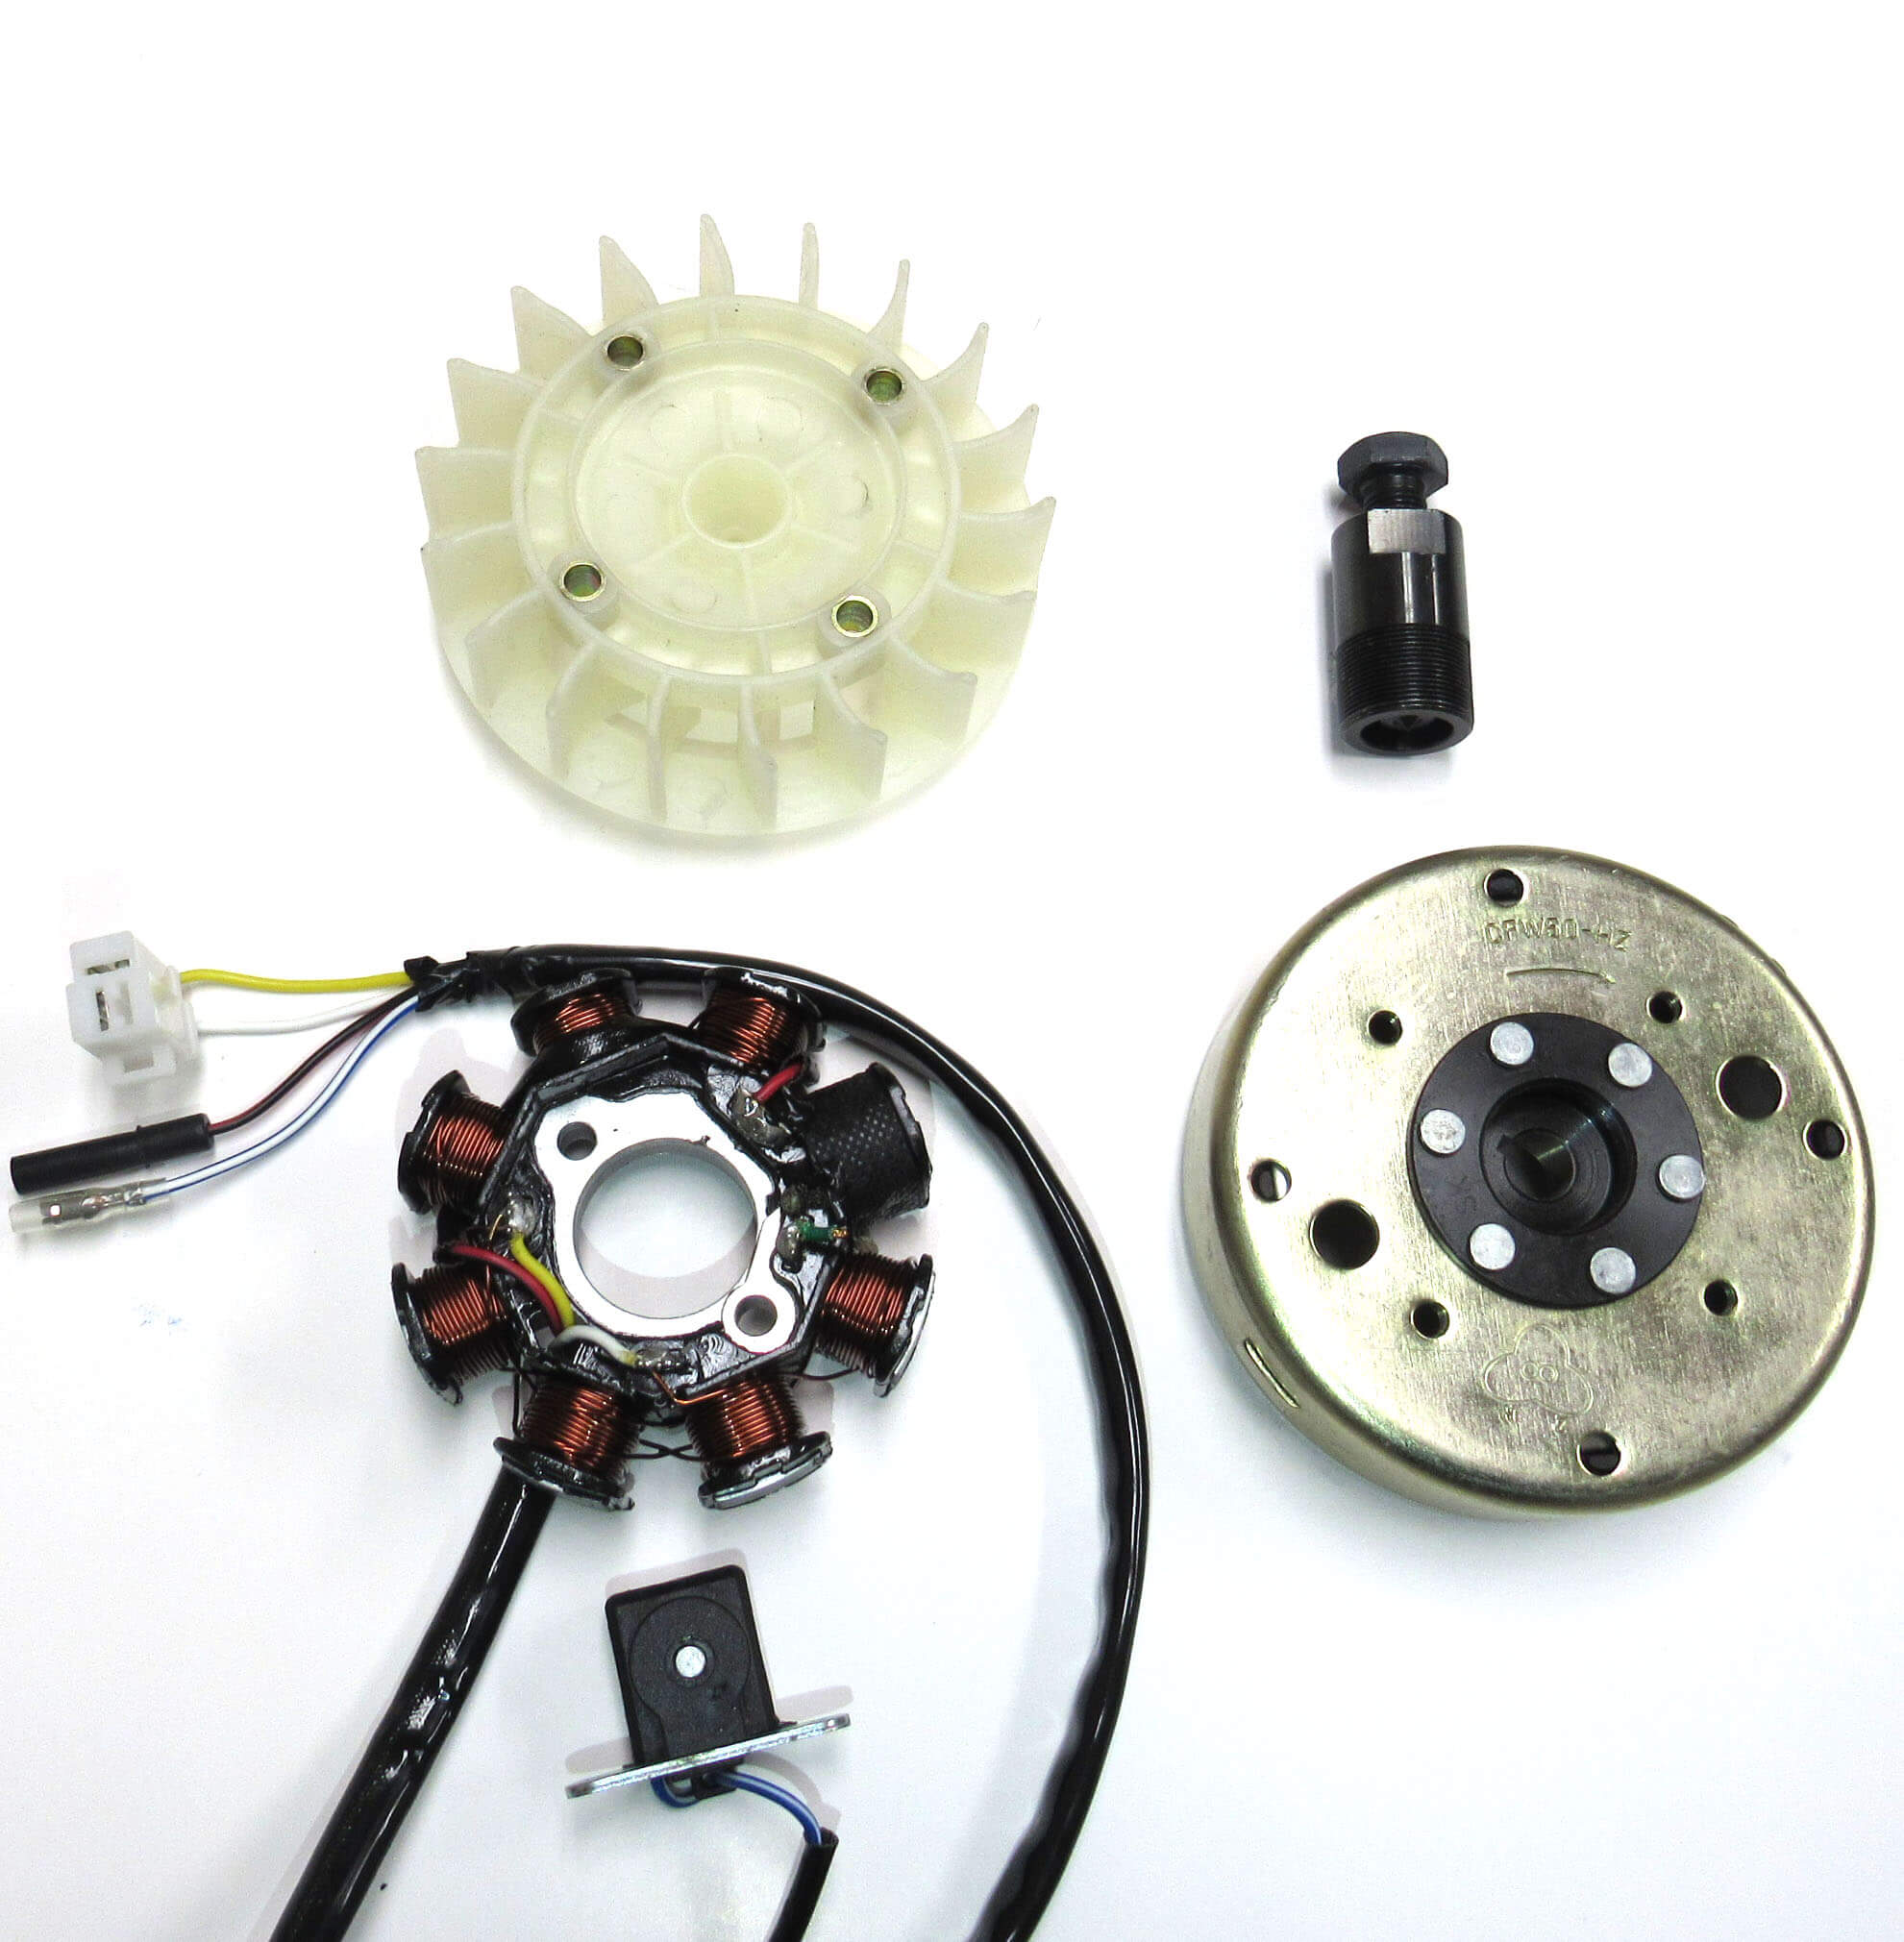 GY6 50cc 8 Pole Stator Magneto, Flywheel, Flwheel Puller Tool & Cooling Fan Fits a variety of GY6-50cc Scooters Stator Dimensions=8 Coils 2 Pin in 3 Pin Jack + 2 Wires Pickup Coil C/C=40